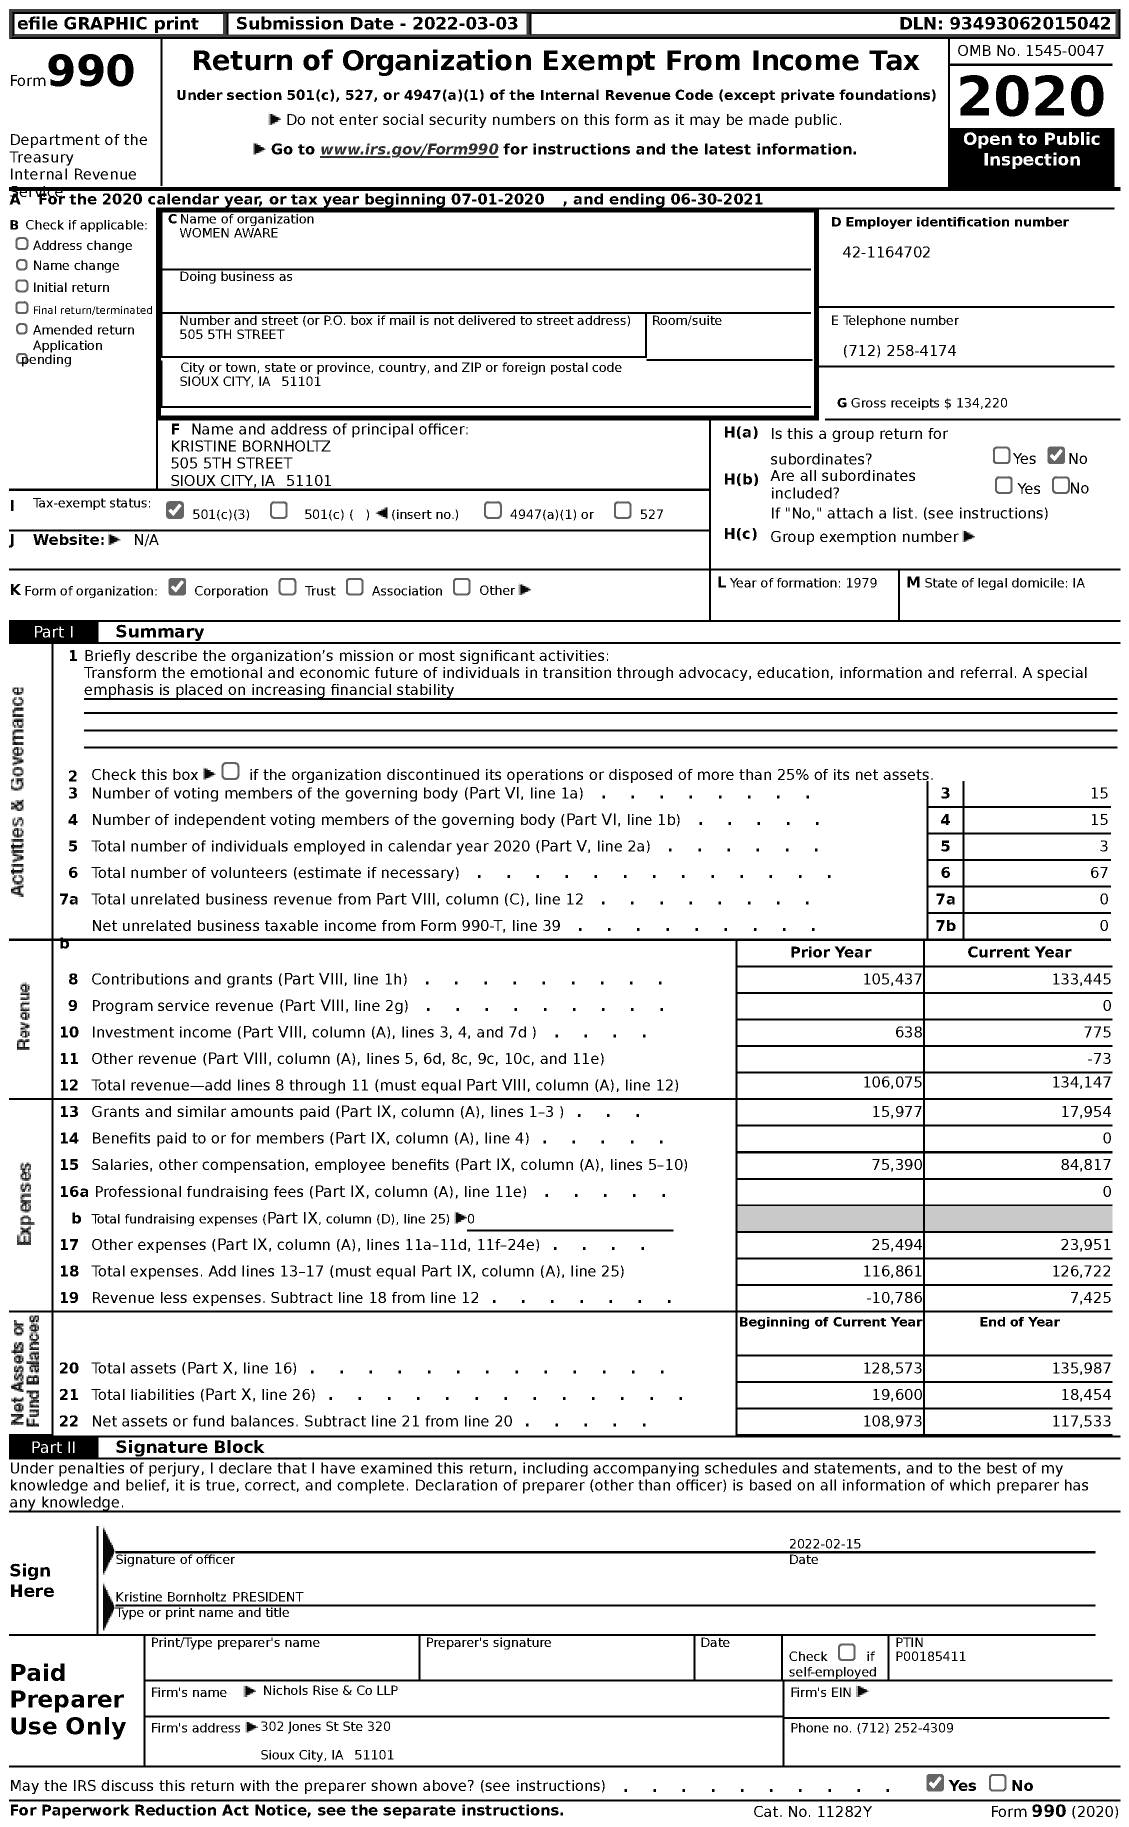 Image of first page of 2020 Form 990 for Women Aware